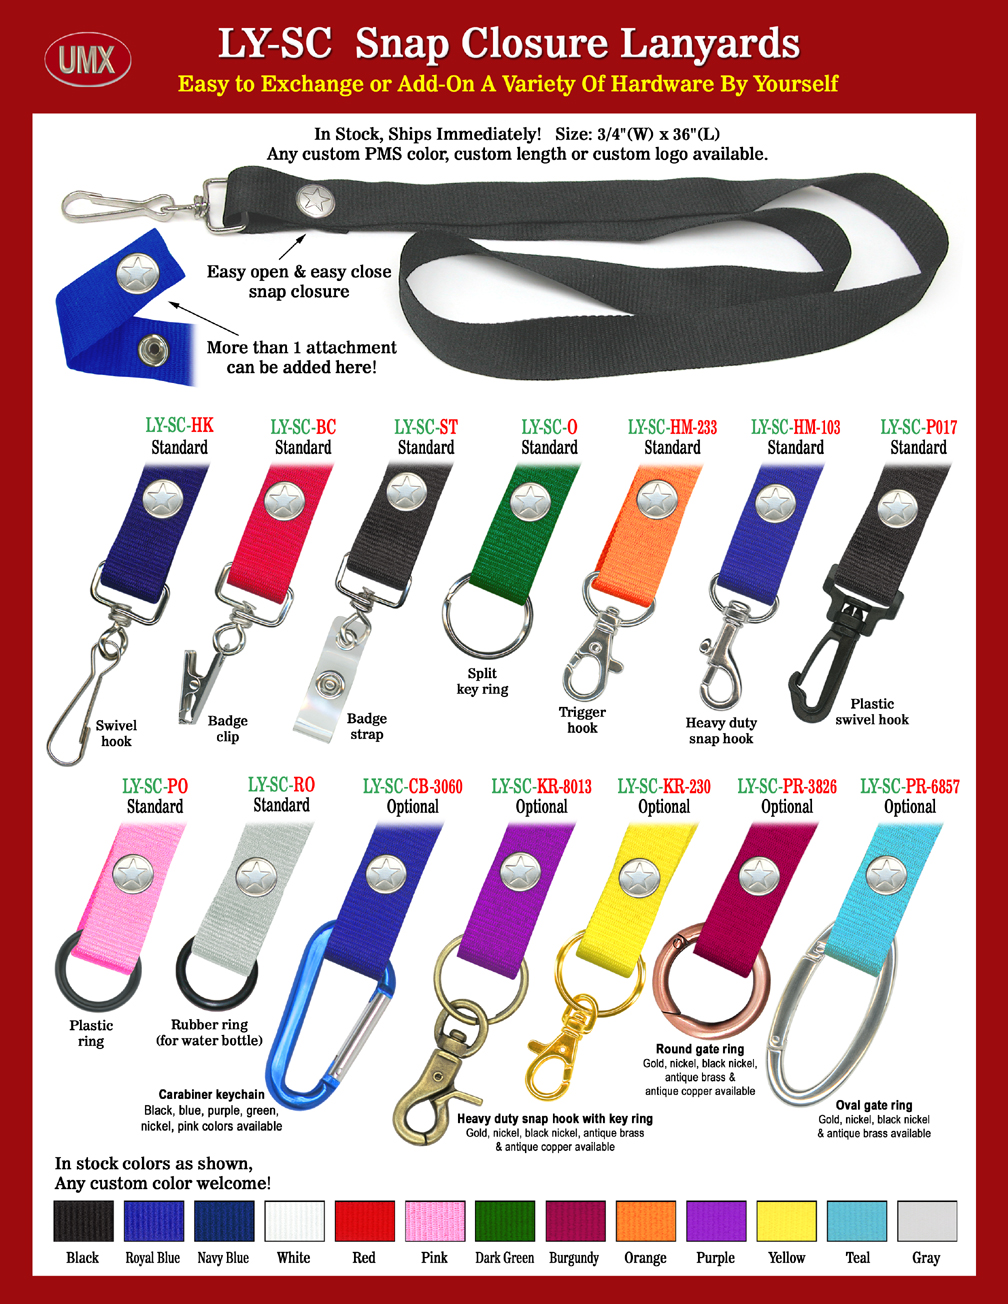 UMX 3/4 Low Price Snap Closure Lanyards With 13-Colors In Stock